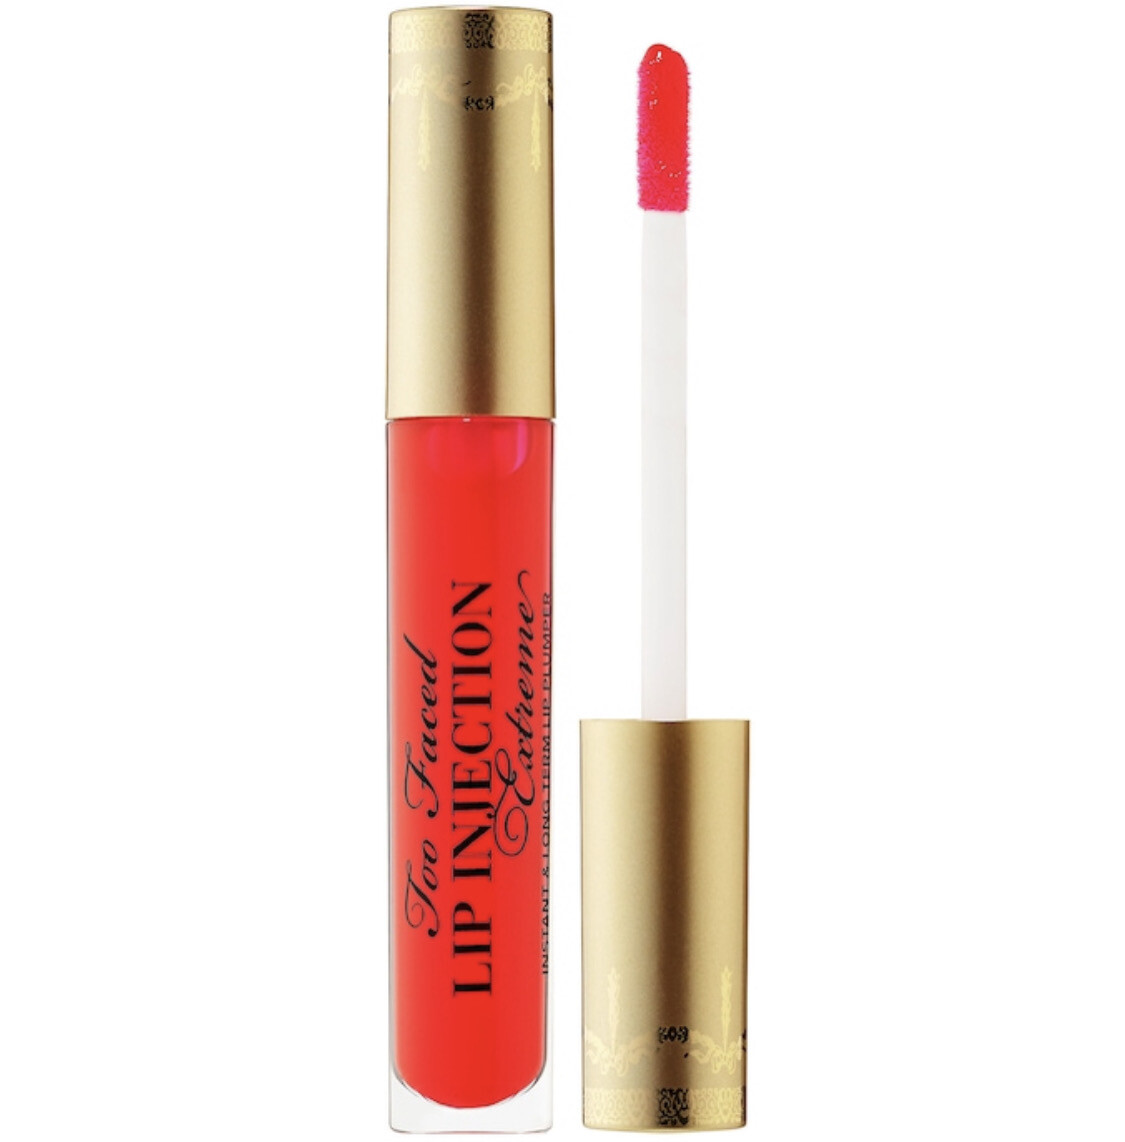 Too Faced - Lip Injection Extreme Hydrating Lip Plumper | Strawberry Kiss - bright cherry red